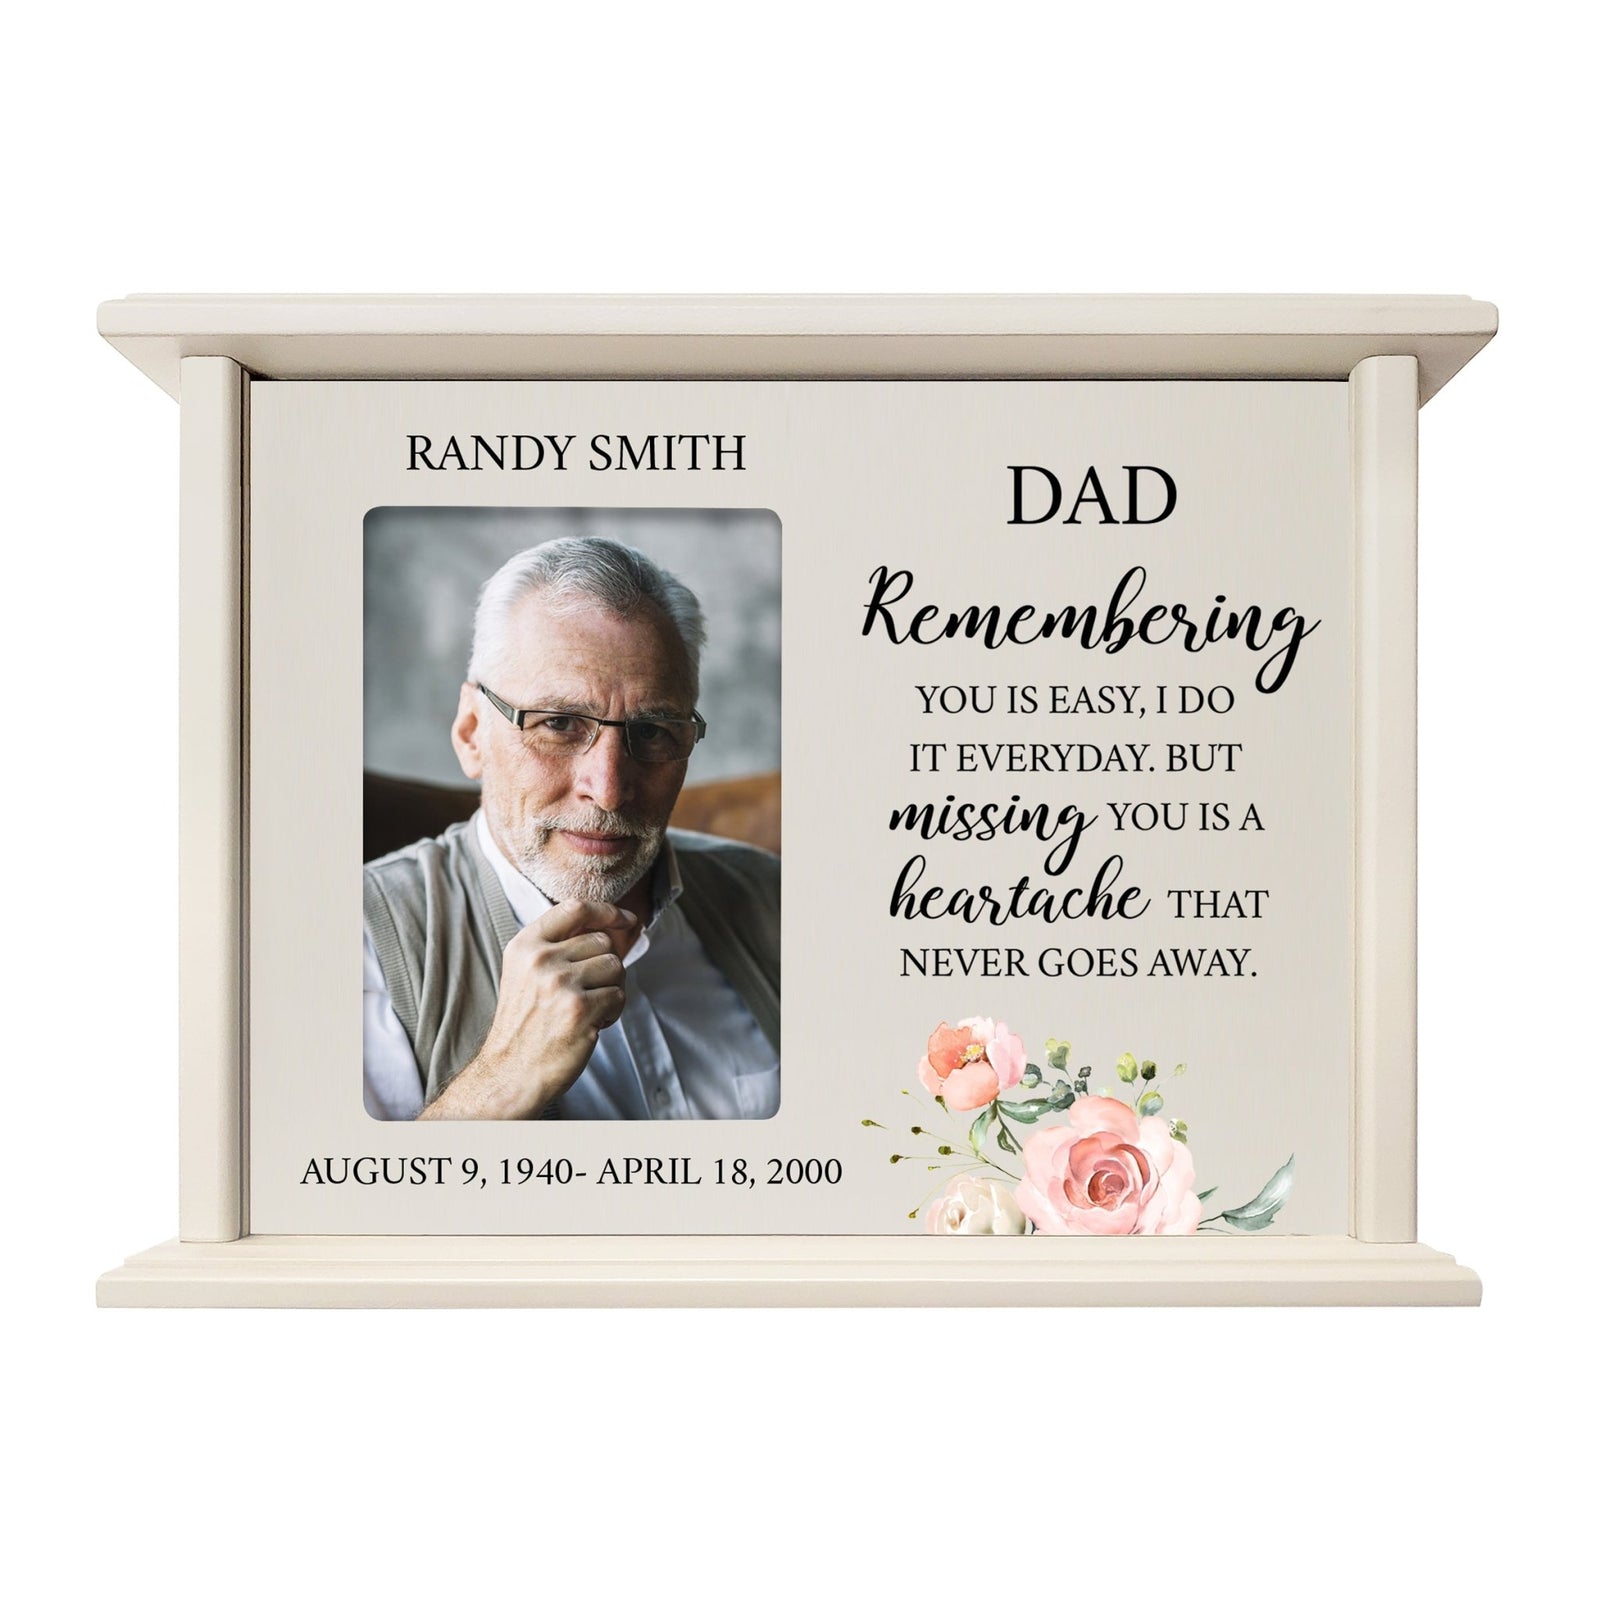 Personalized Memorial Cherry Wood 12 x 4.5 x 9 Cremation Urn Box with Picture Frame holds 200 cu in of Human Ashes and 4x6 Photo - Remembering You Is Easy - LifeSong Milestones